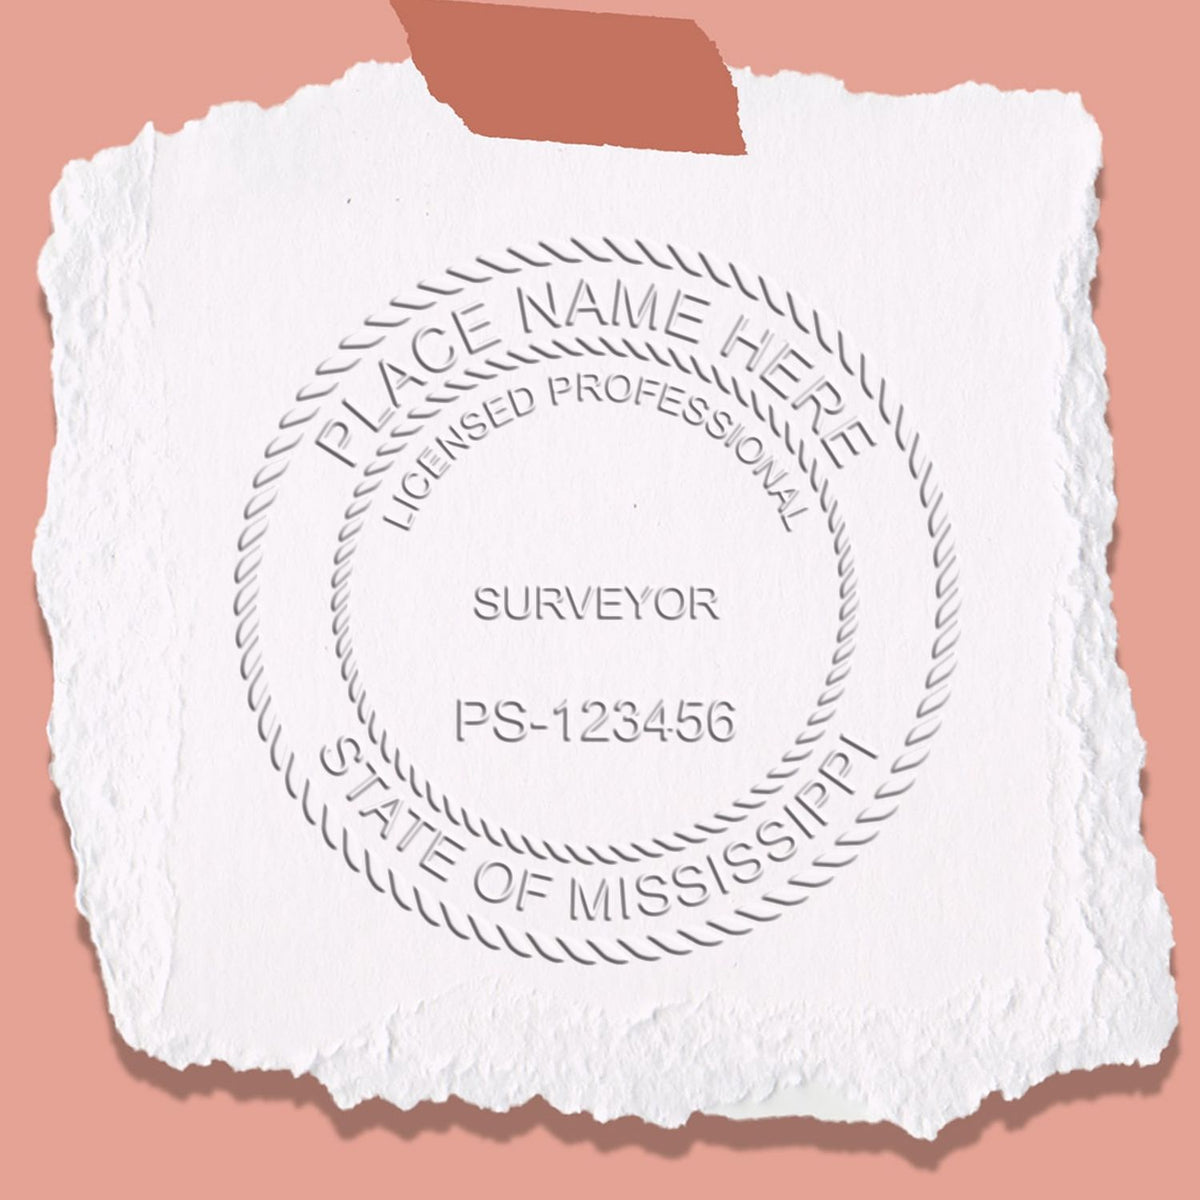 The Long Reach Mississippi Land Surveyor Seal stamp impression comes to life with a crisp, detailed photo on paper - showcasing true professional quality.